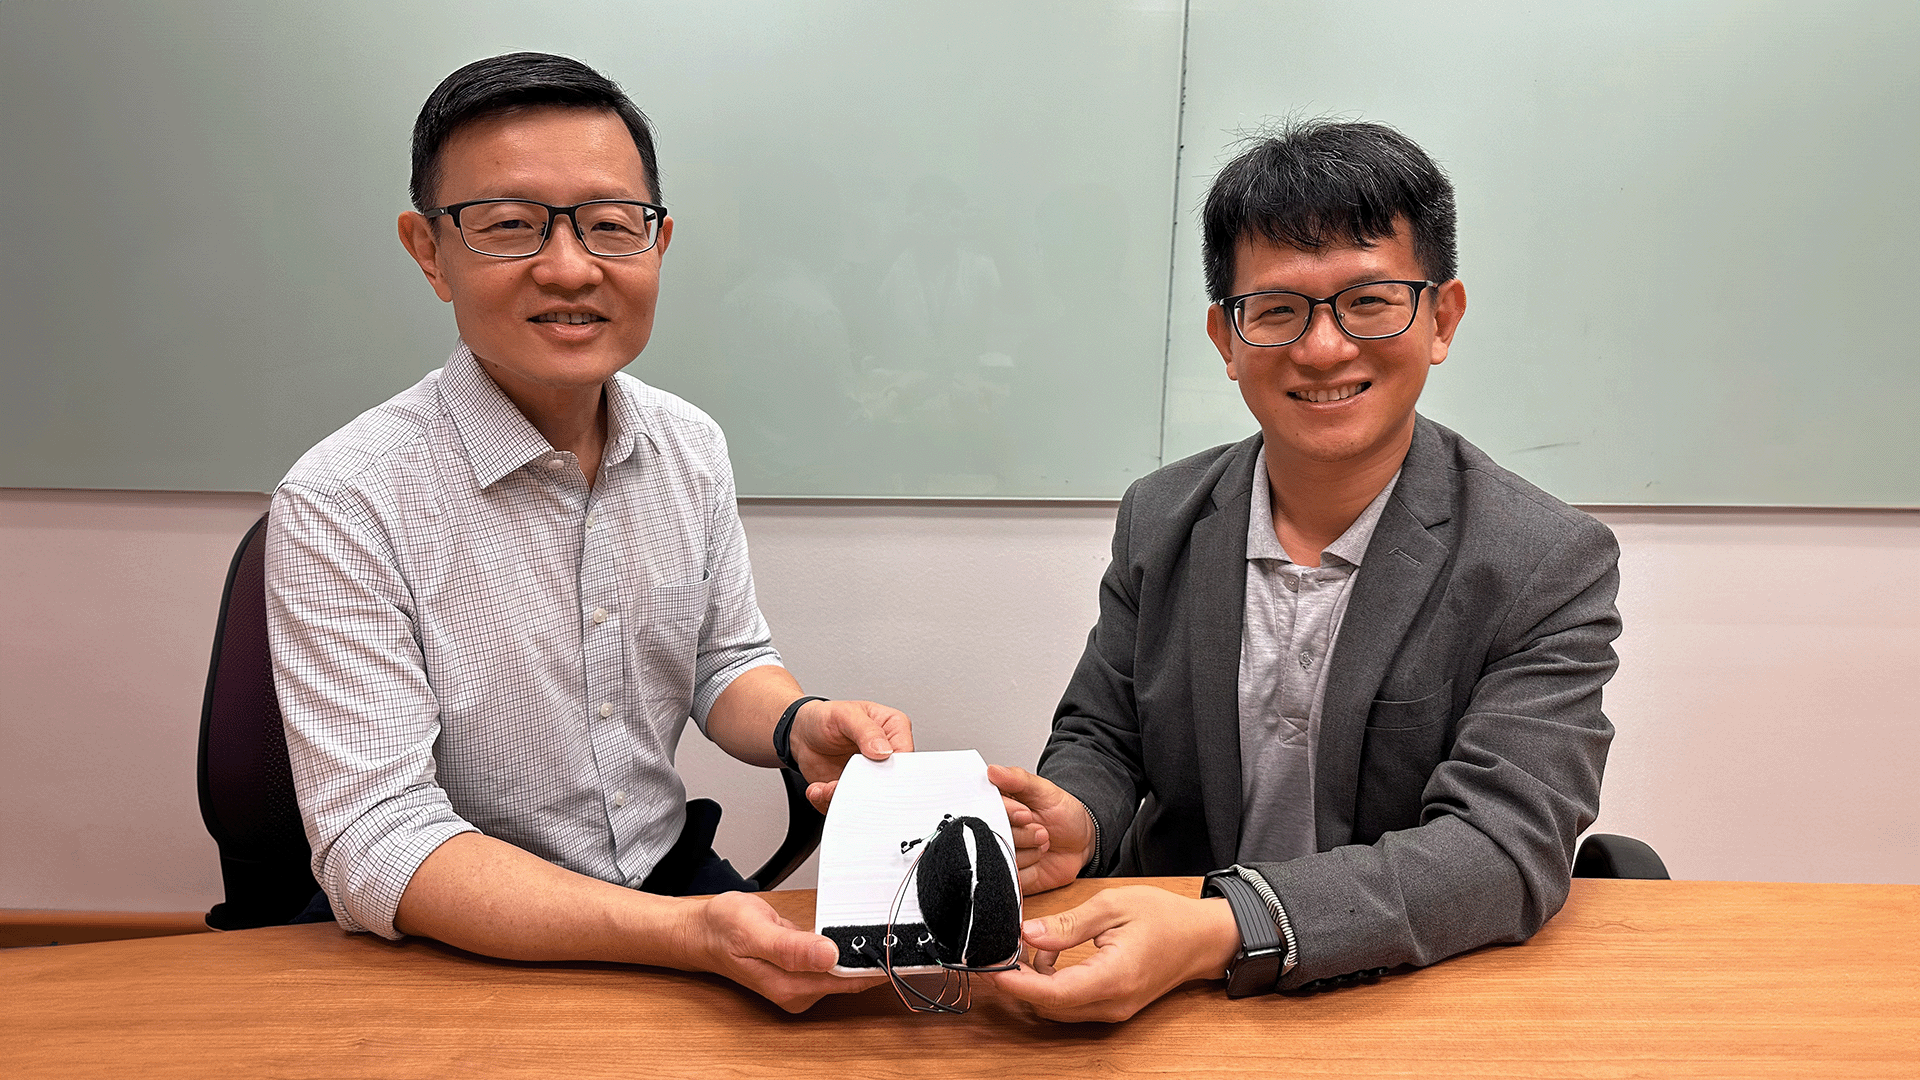 Prof Lim Chwee Teck (left) and Dr Yeo Joo Chuan (right) holding a prototype of the FUNction Device.